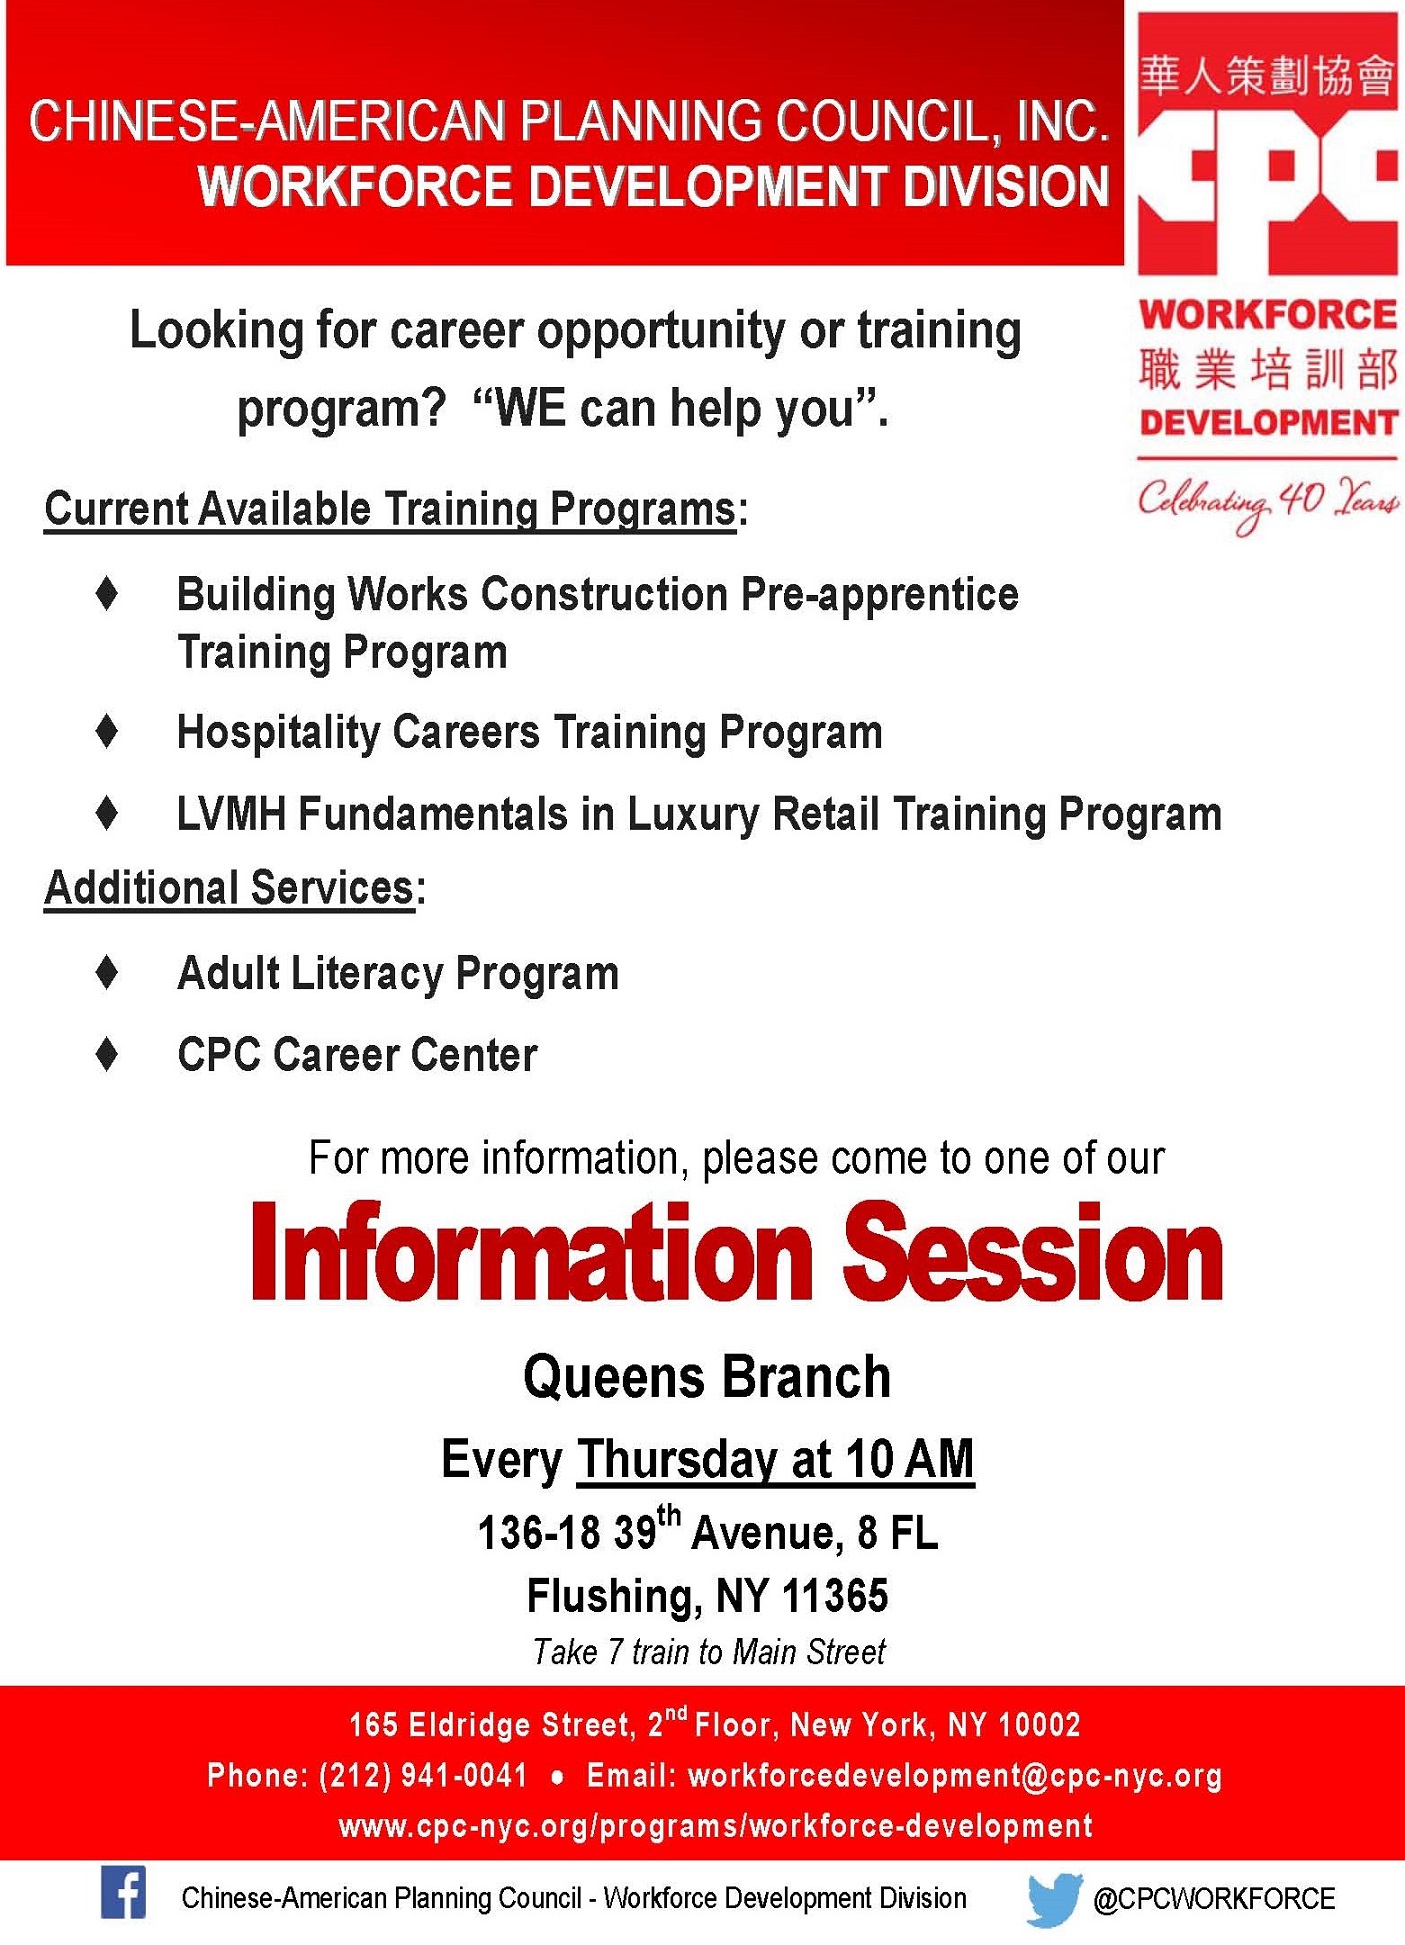 We are still recruiting for our Hospitality Training Program.  Please come to our information session to register. 